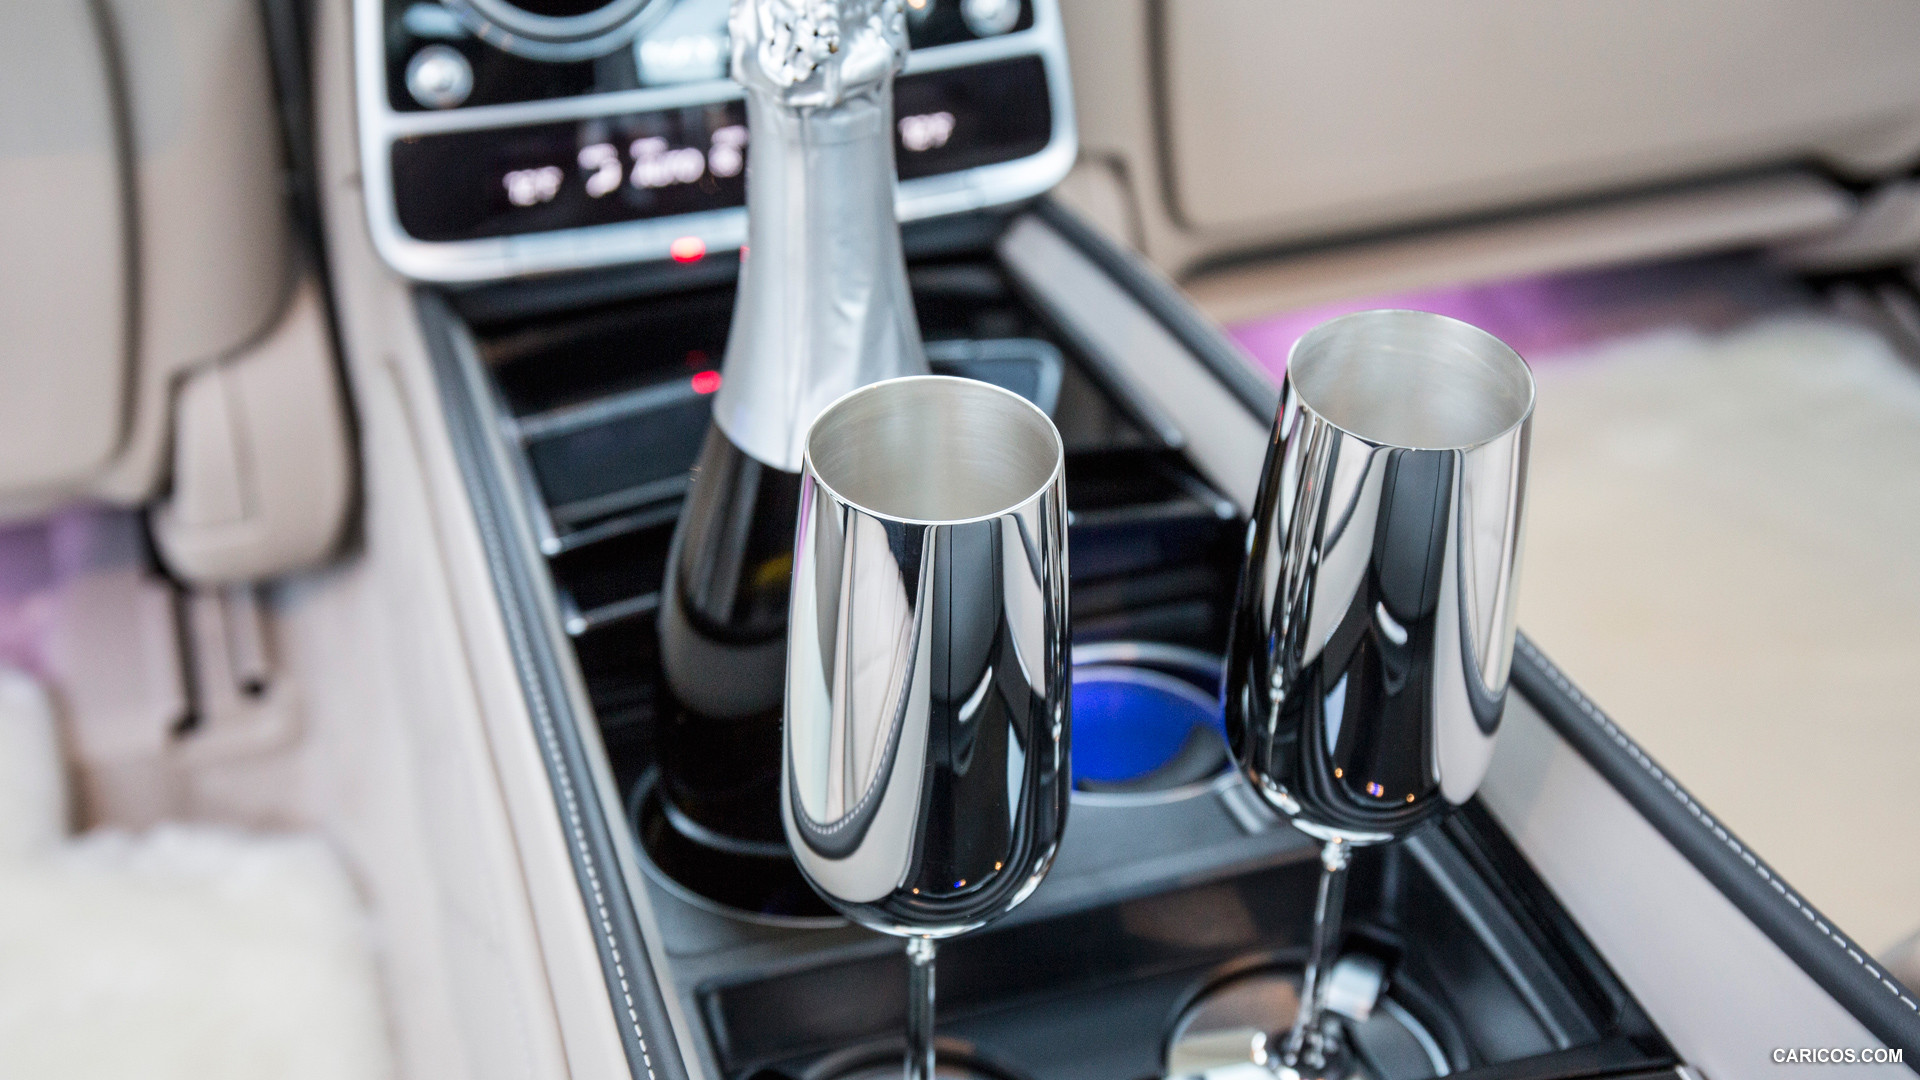 2016 Mercedes-Maybach S-Class S600 - Champagne Glasses - Interior Detail, #178 of 225